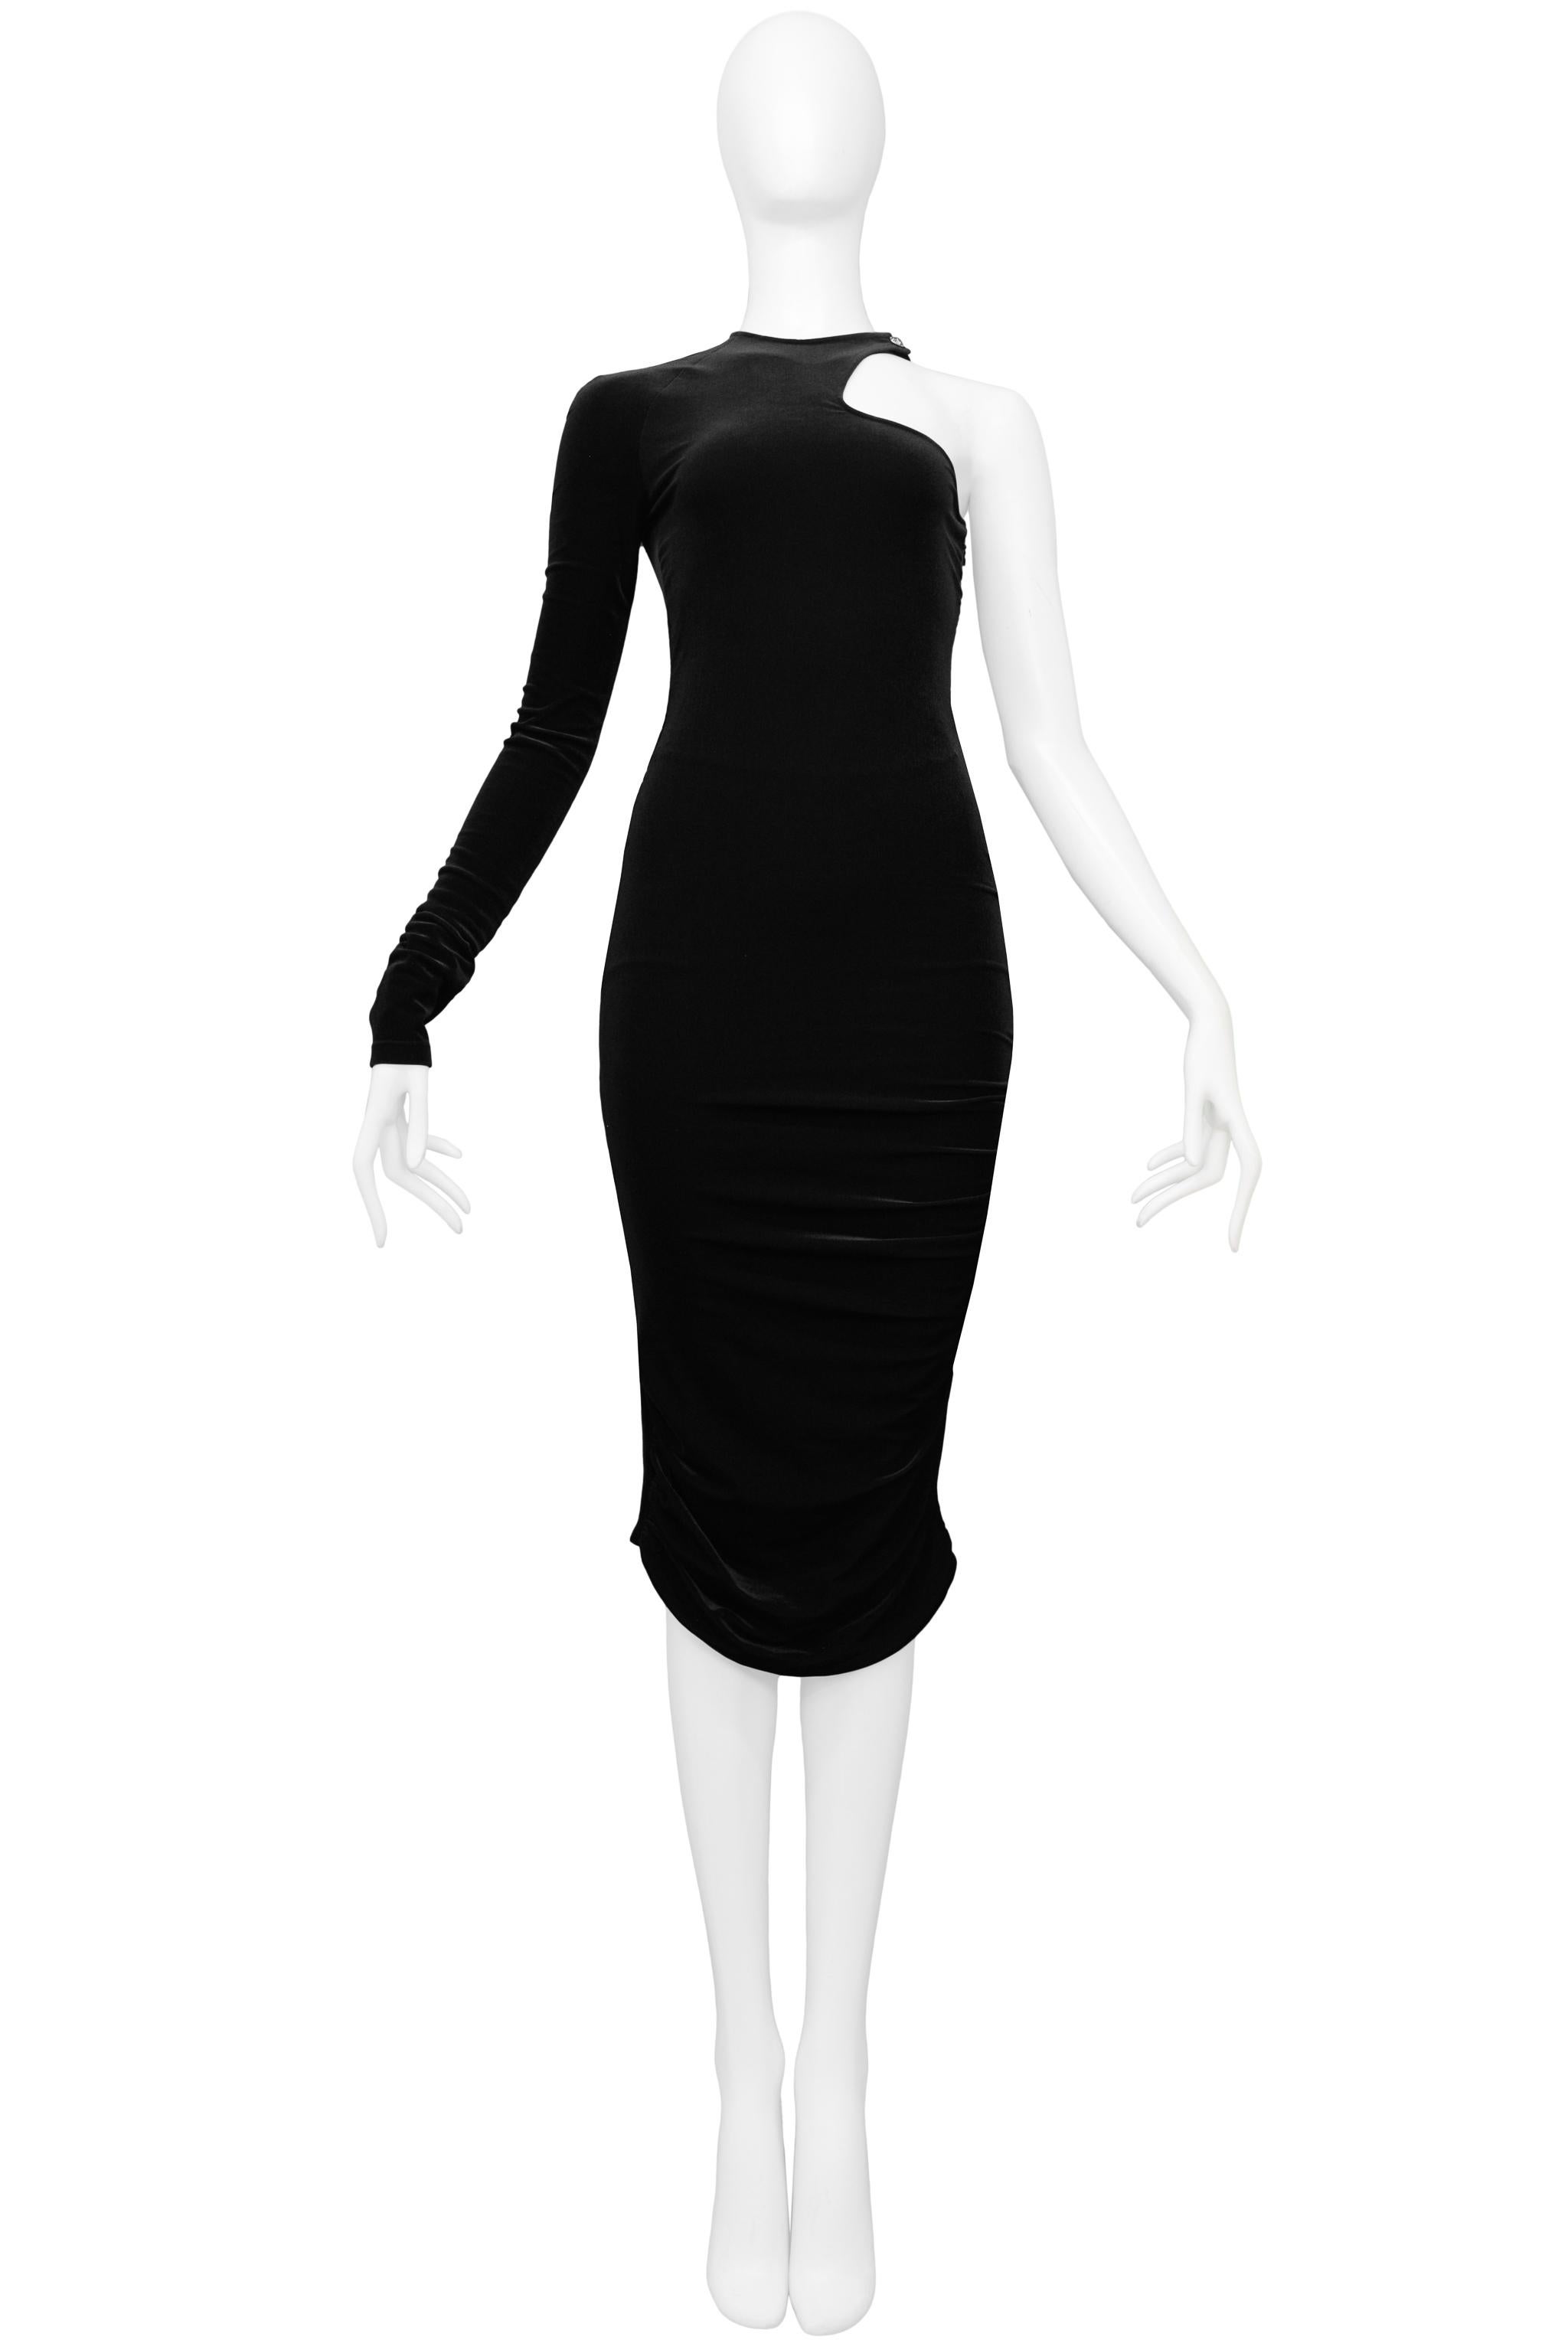 Resurrection is pleased to offer a Versace black velvet body-con dress featuring one sleeve, high neck with side cutout and silver-tone Medusa snap, side zipper, internal mesh half bodysuit, back cutout, and ruched sides at the hem. 

Versace
Size